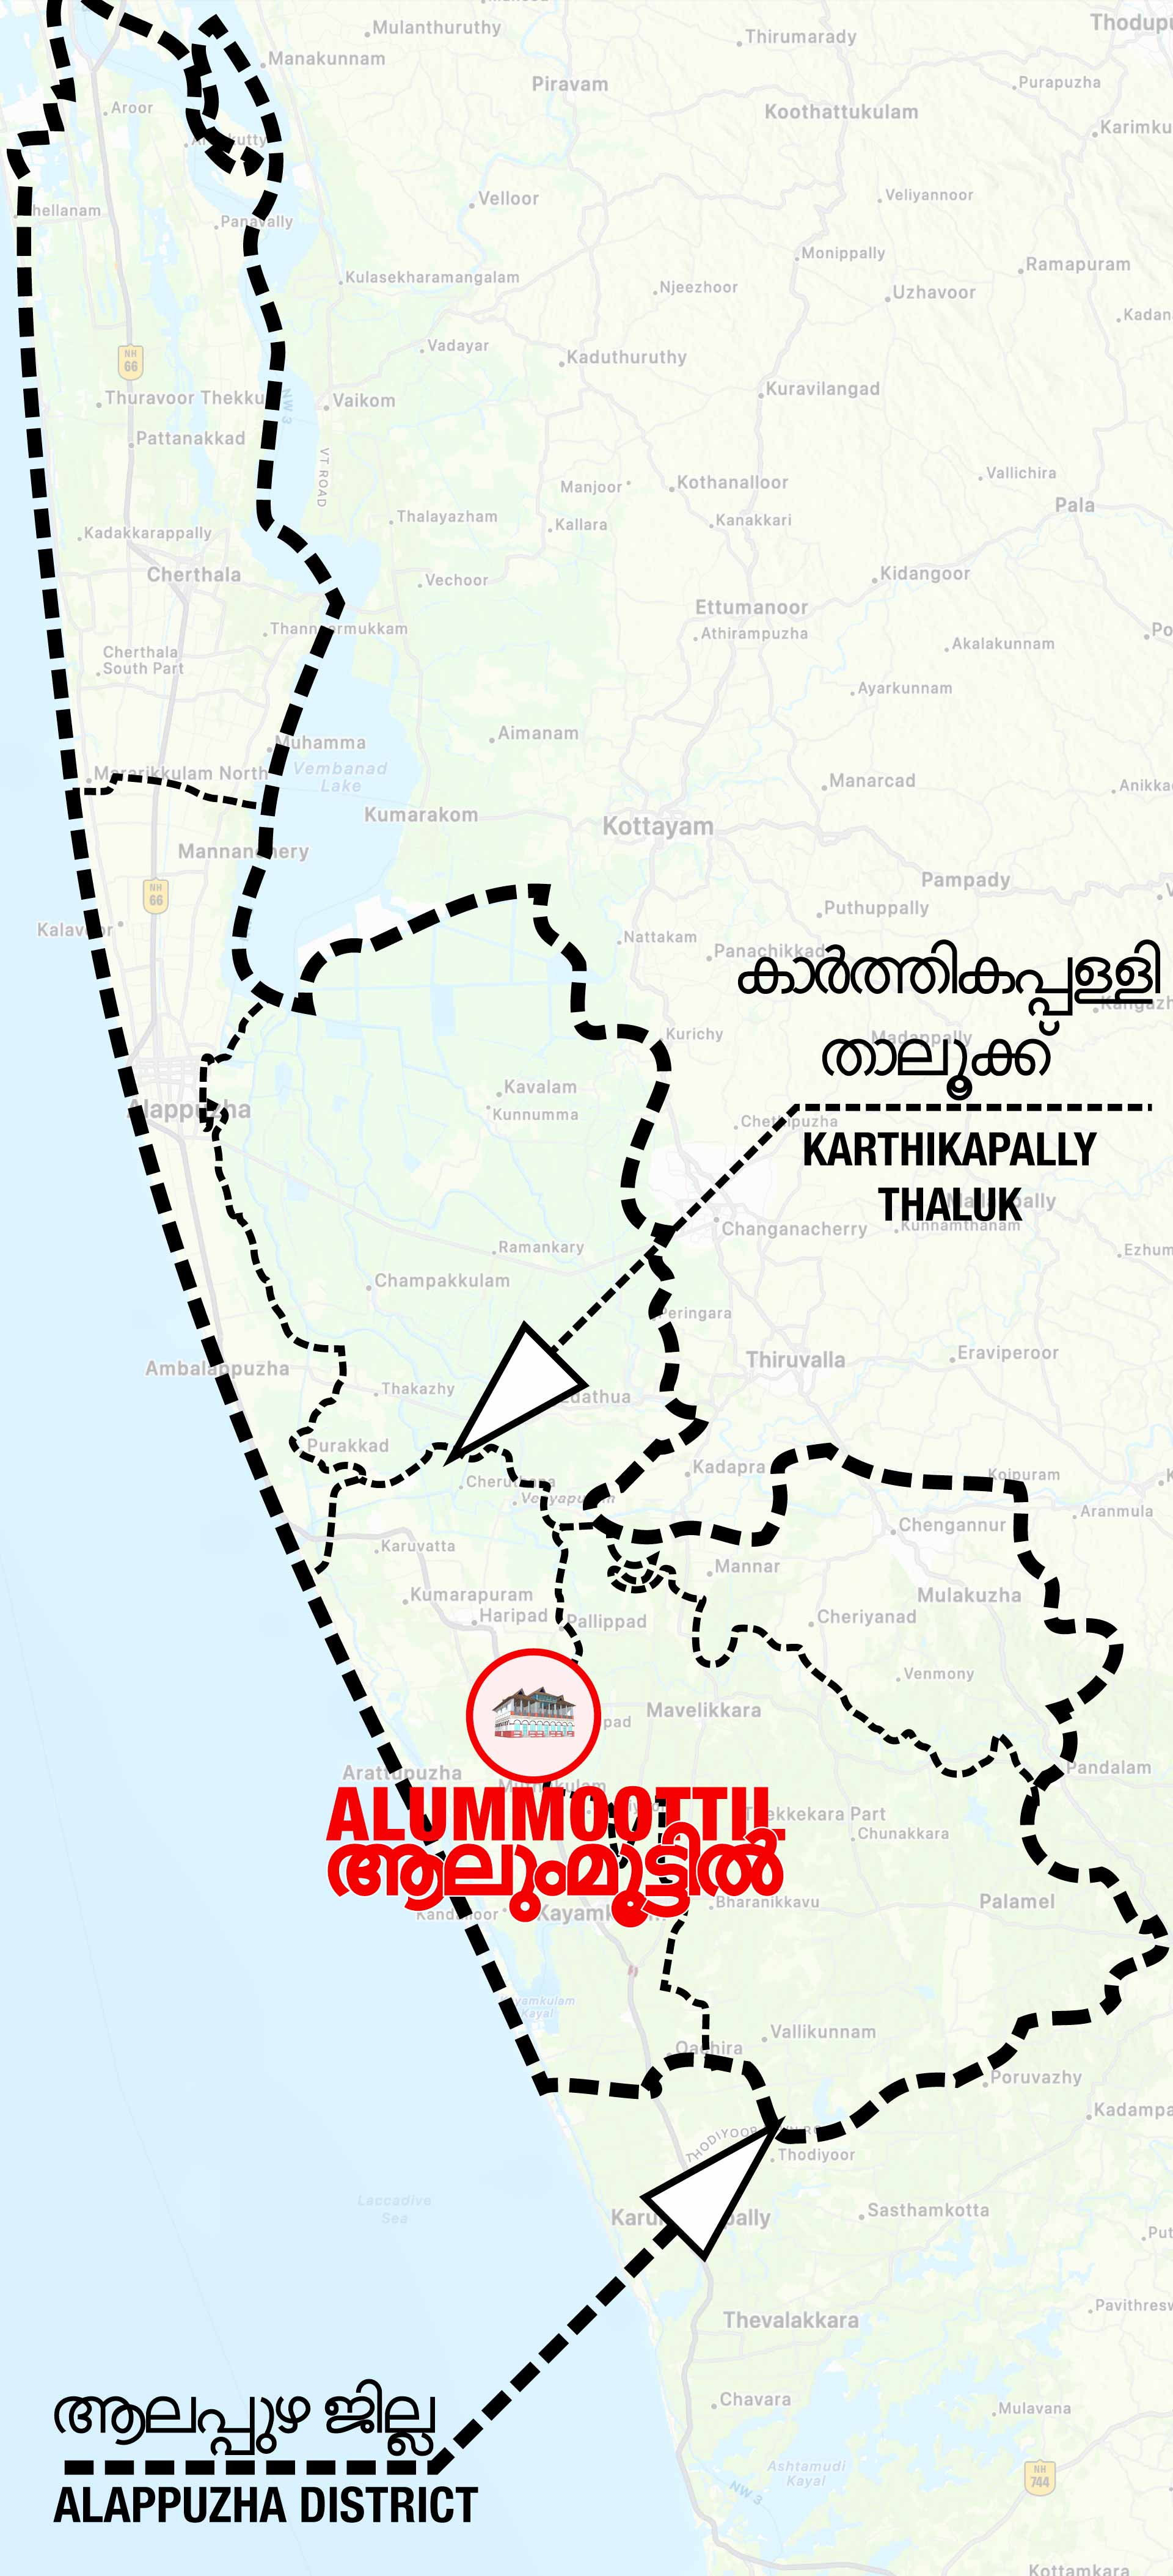 Location of Alummoottil in Alappuzha District